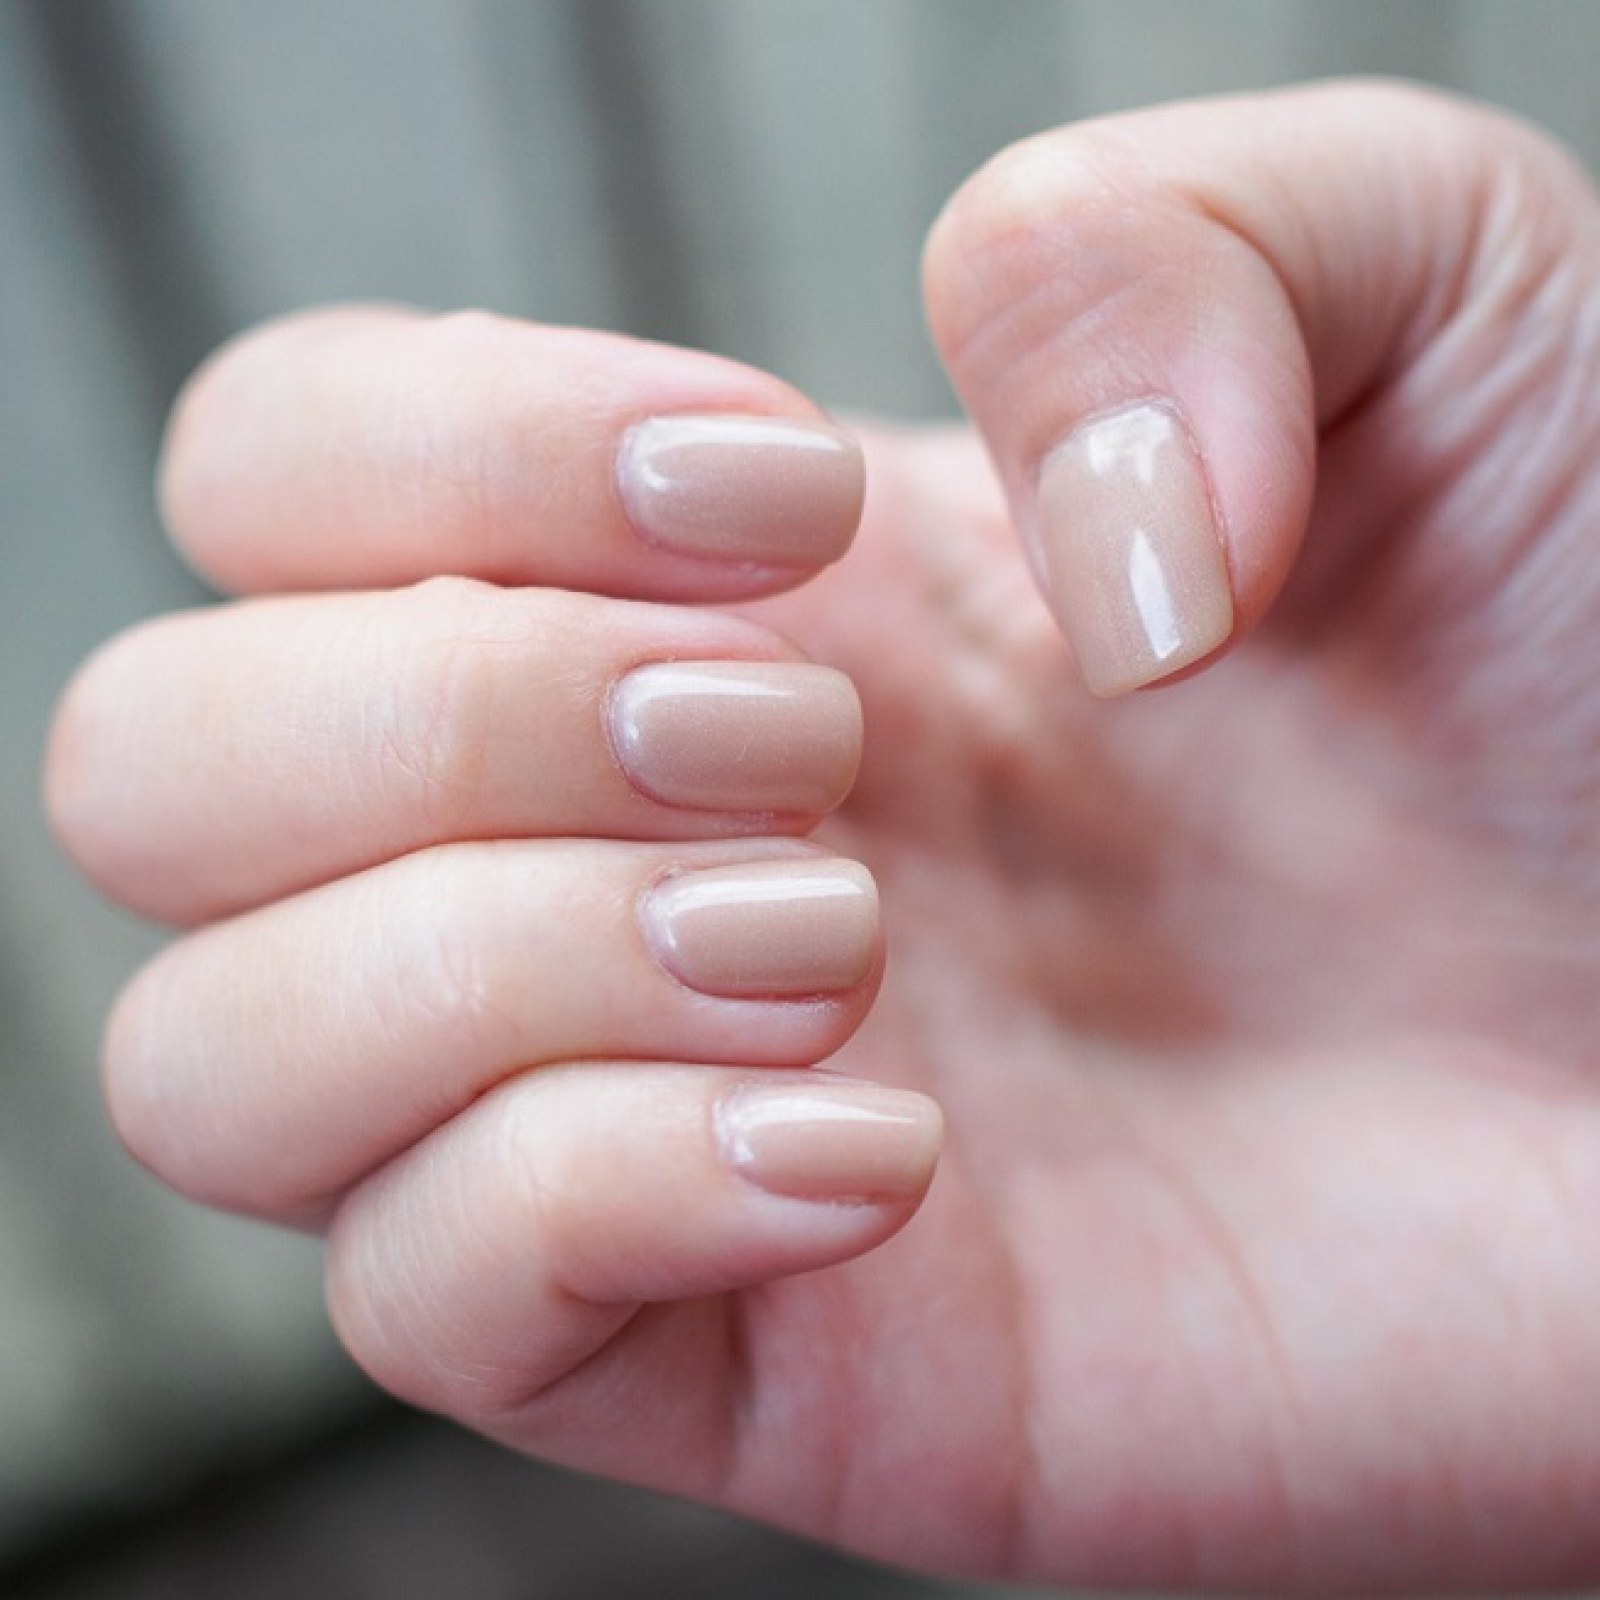 Anti-Date Rape 'Undercover' Nail Polish Changes Colour When Drinks are  Spiked with Rohypnol and GHB